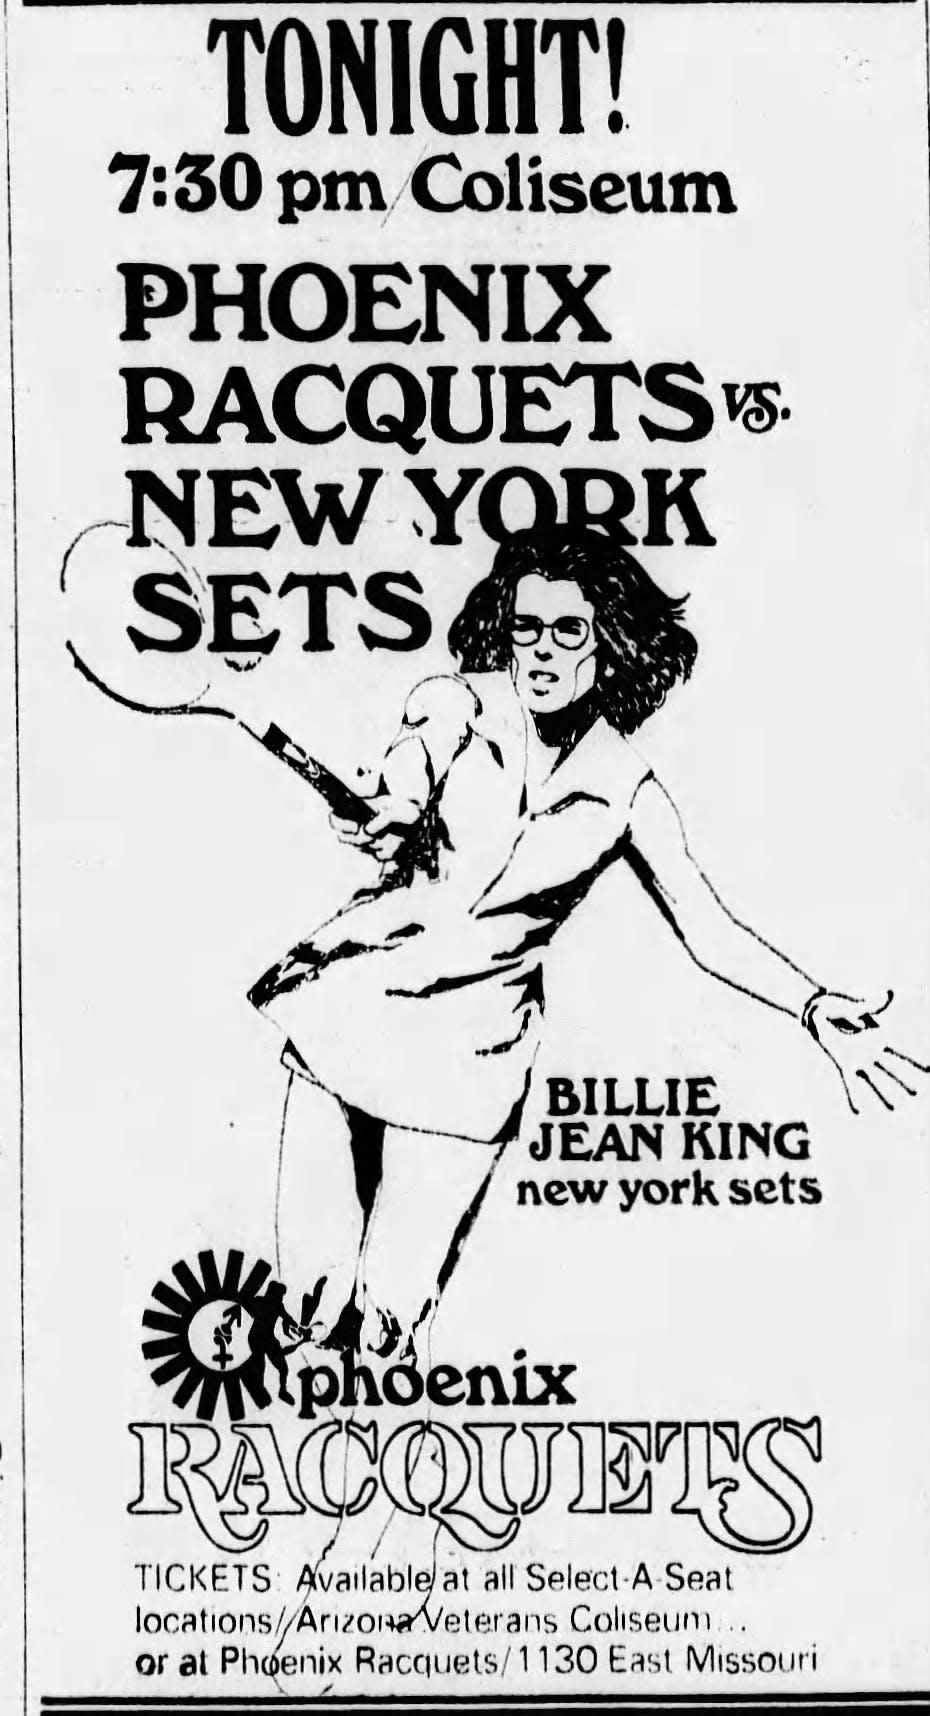 A World Team Tennis ad in the Arizona Republic promoting a 1975 match between Billy Jean King's New York Aces and the Phoenix Racquets.